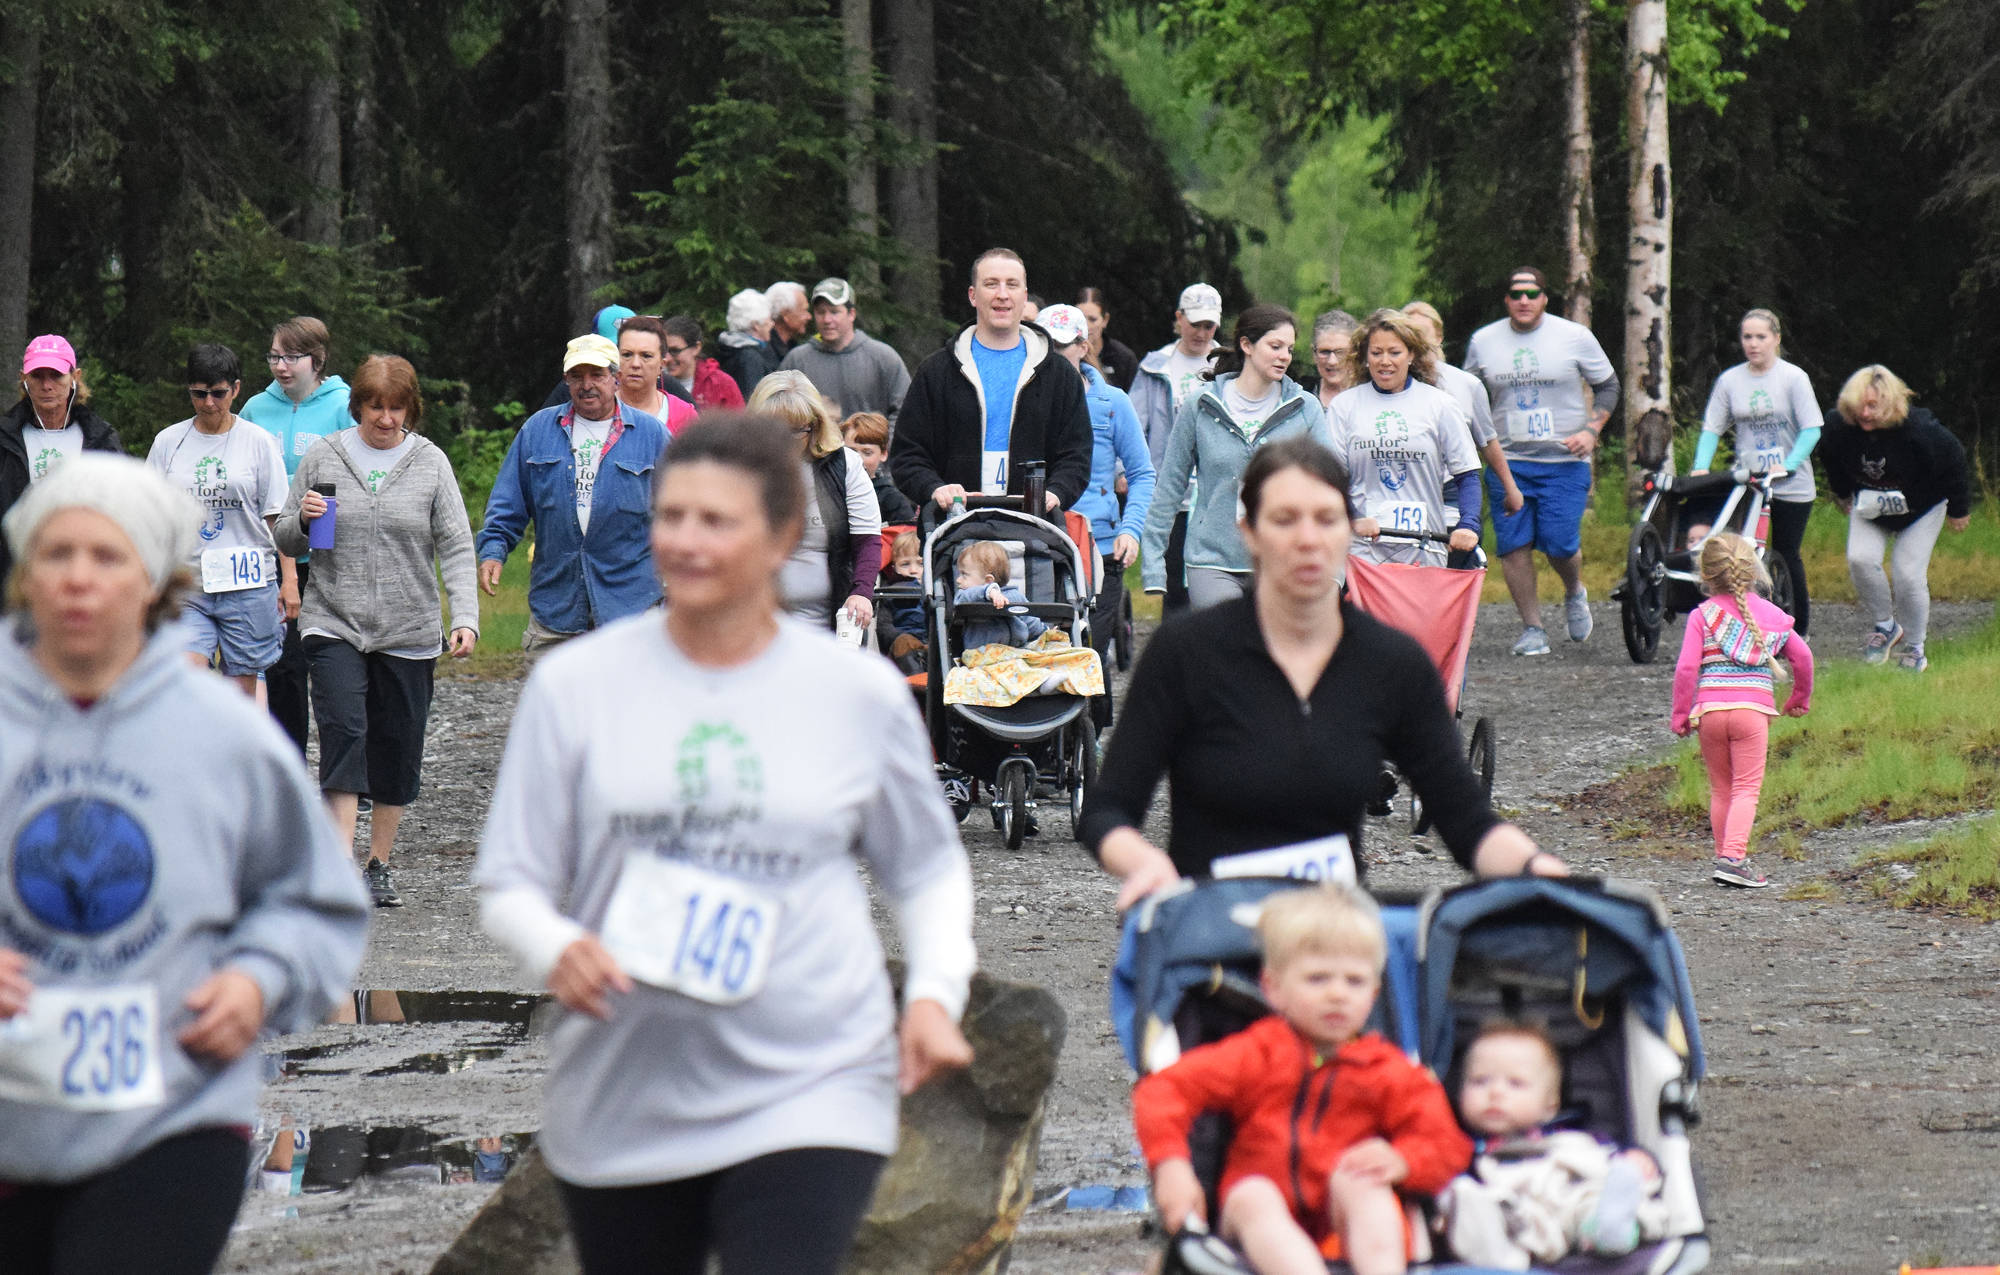 The field of runners in the Run for the River 5-kilometer race stream out onto the course Saturday morning in Soldotna. (Photo by Joey Klecka/Peninsula Clarion)